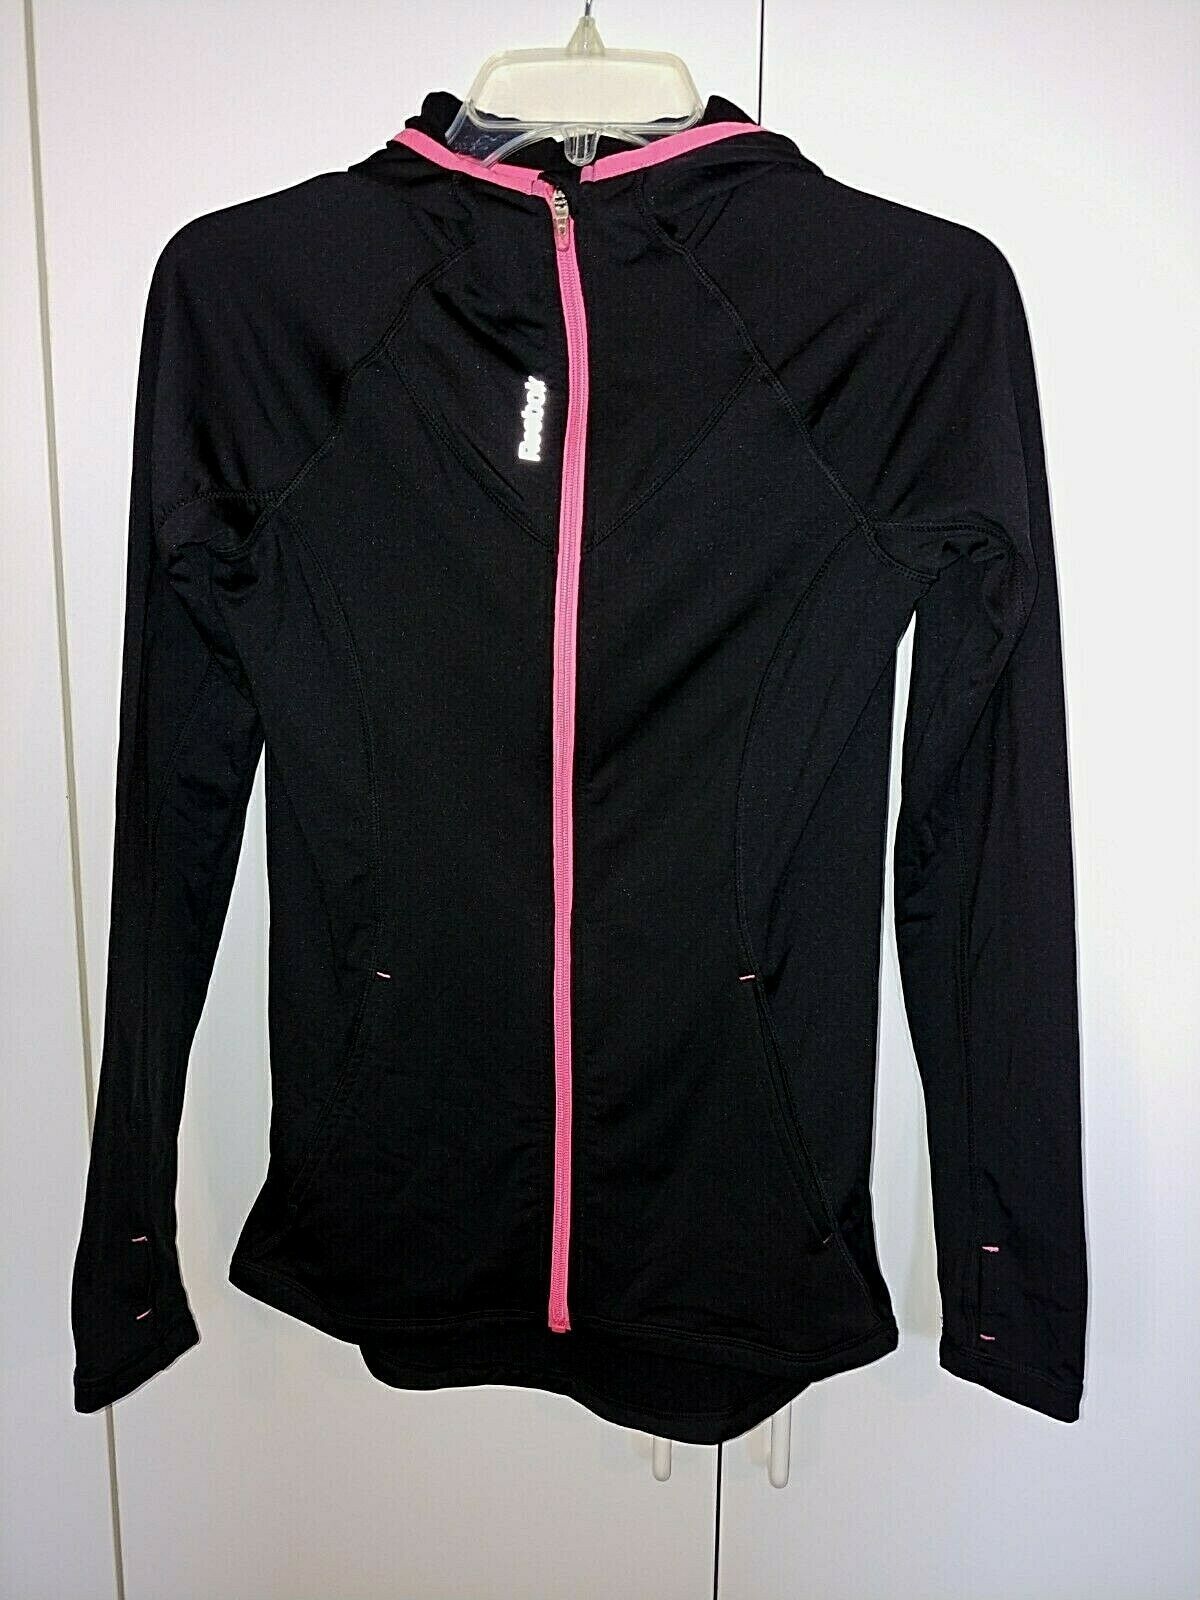 Primary image for REEBOK LADIES LS BLACK HOODED ZIP WARM-UP JACKET W/THUMB HOLE-XS-GENTLY WORN